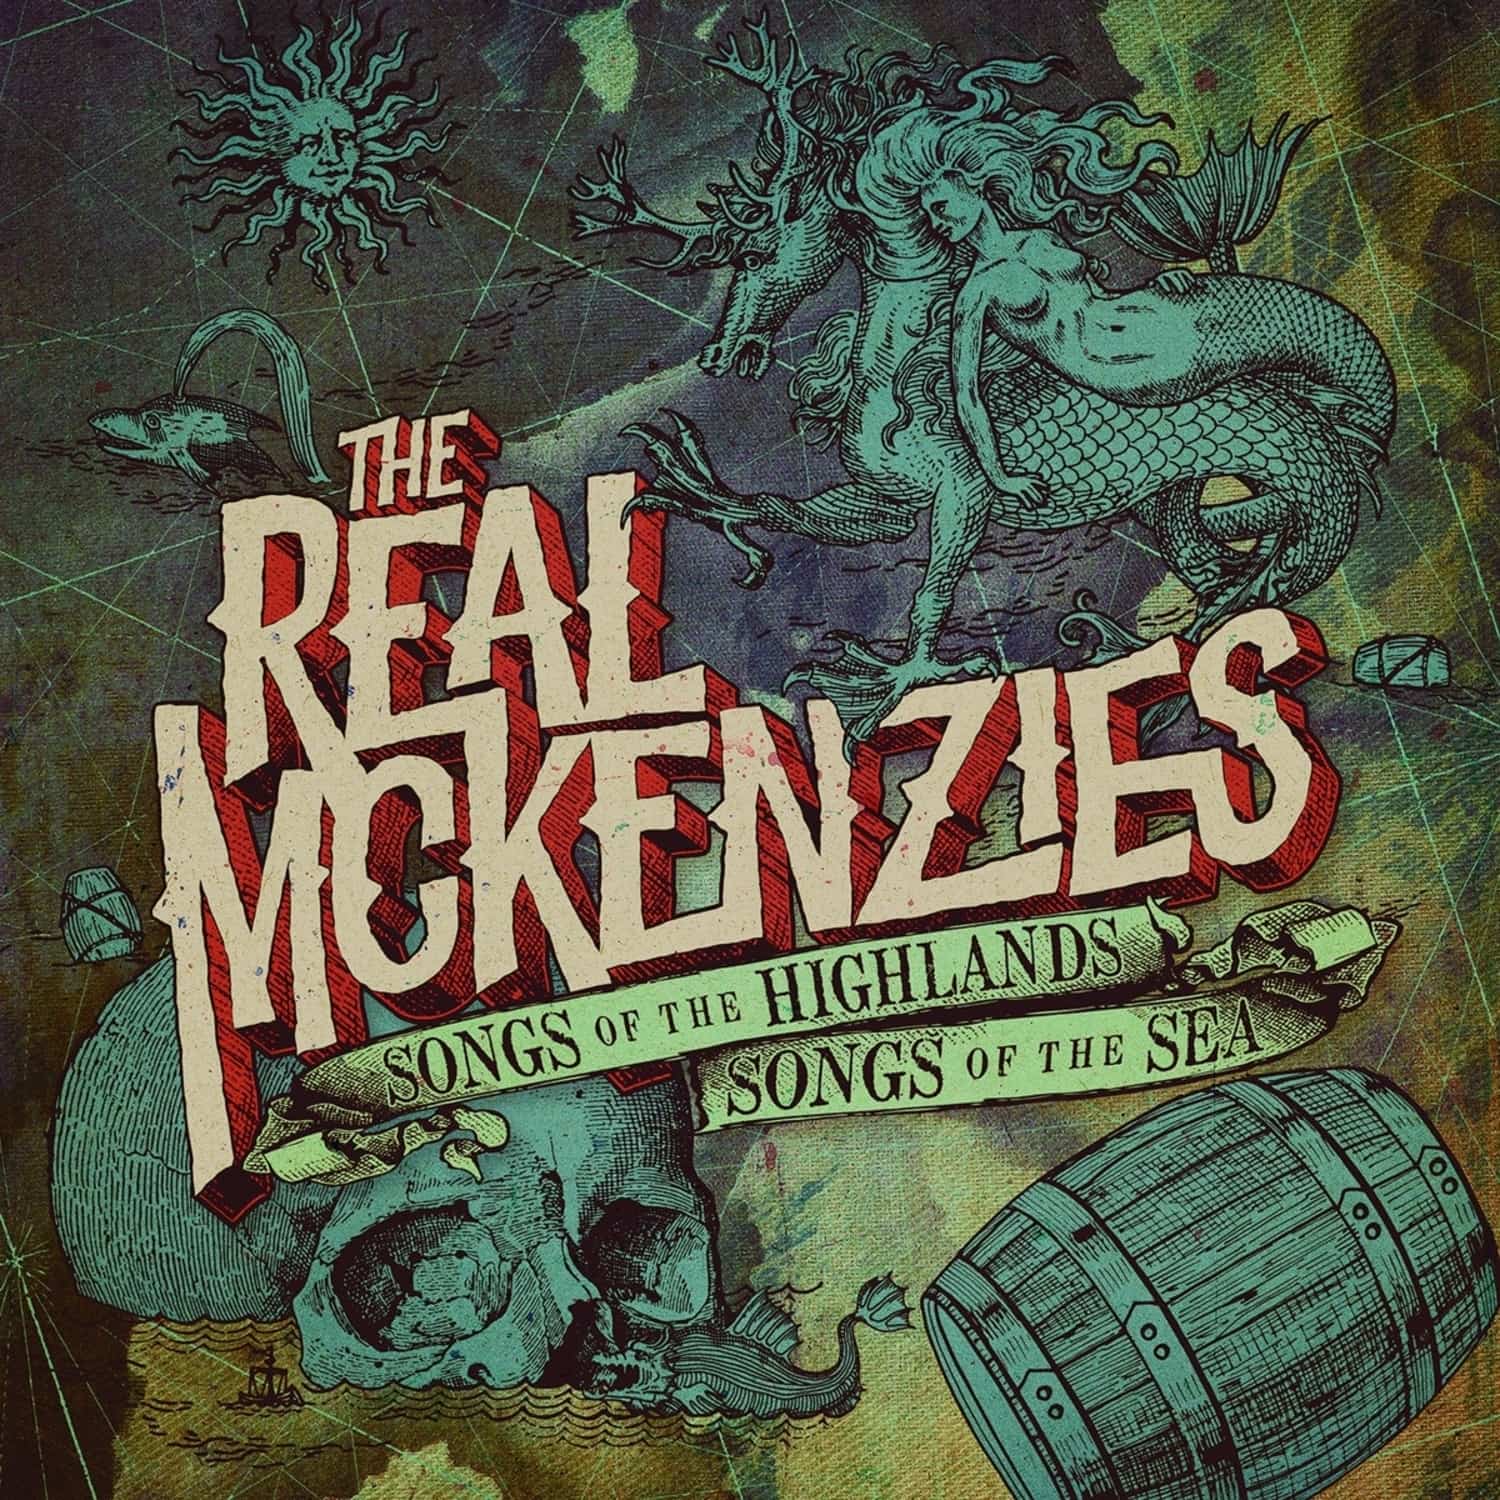 Real McKenzies - SONGS OF THE HIGHLANDS, SONGS OF THE SEA